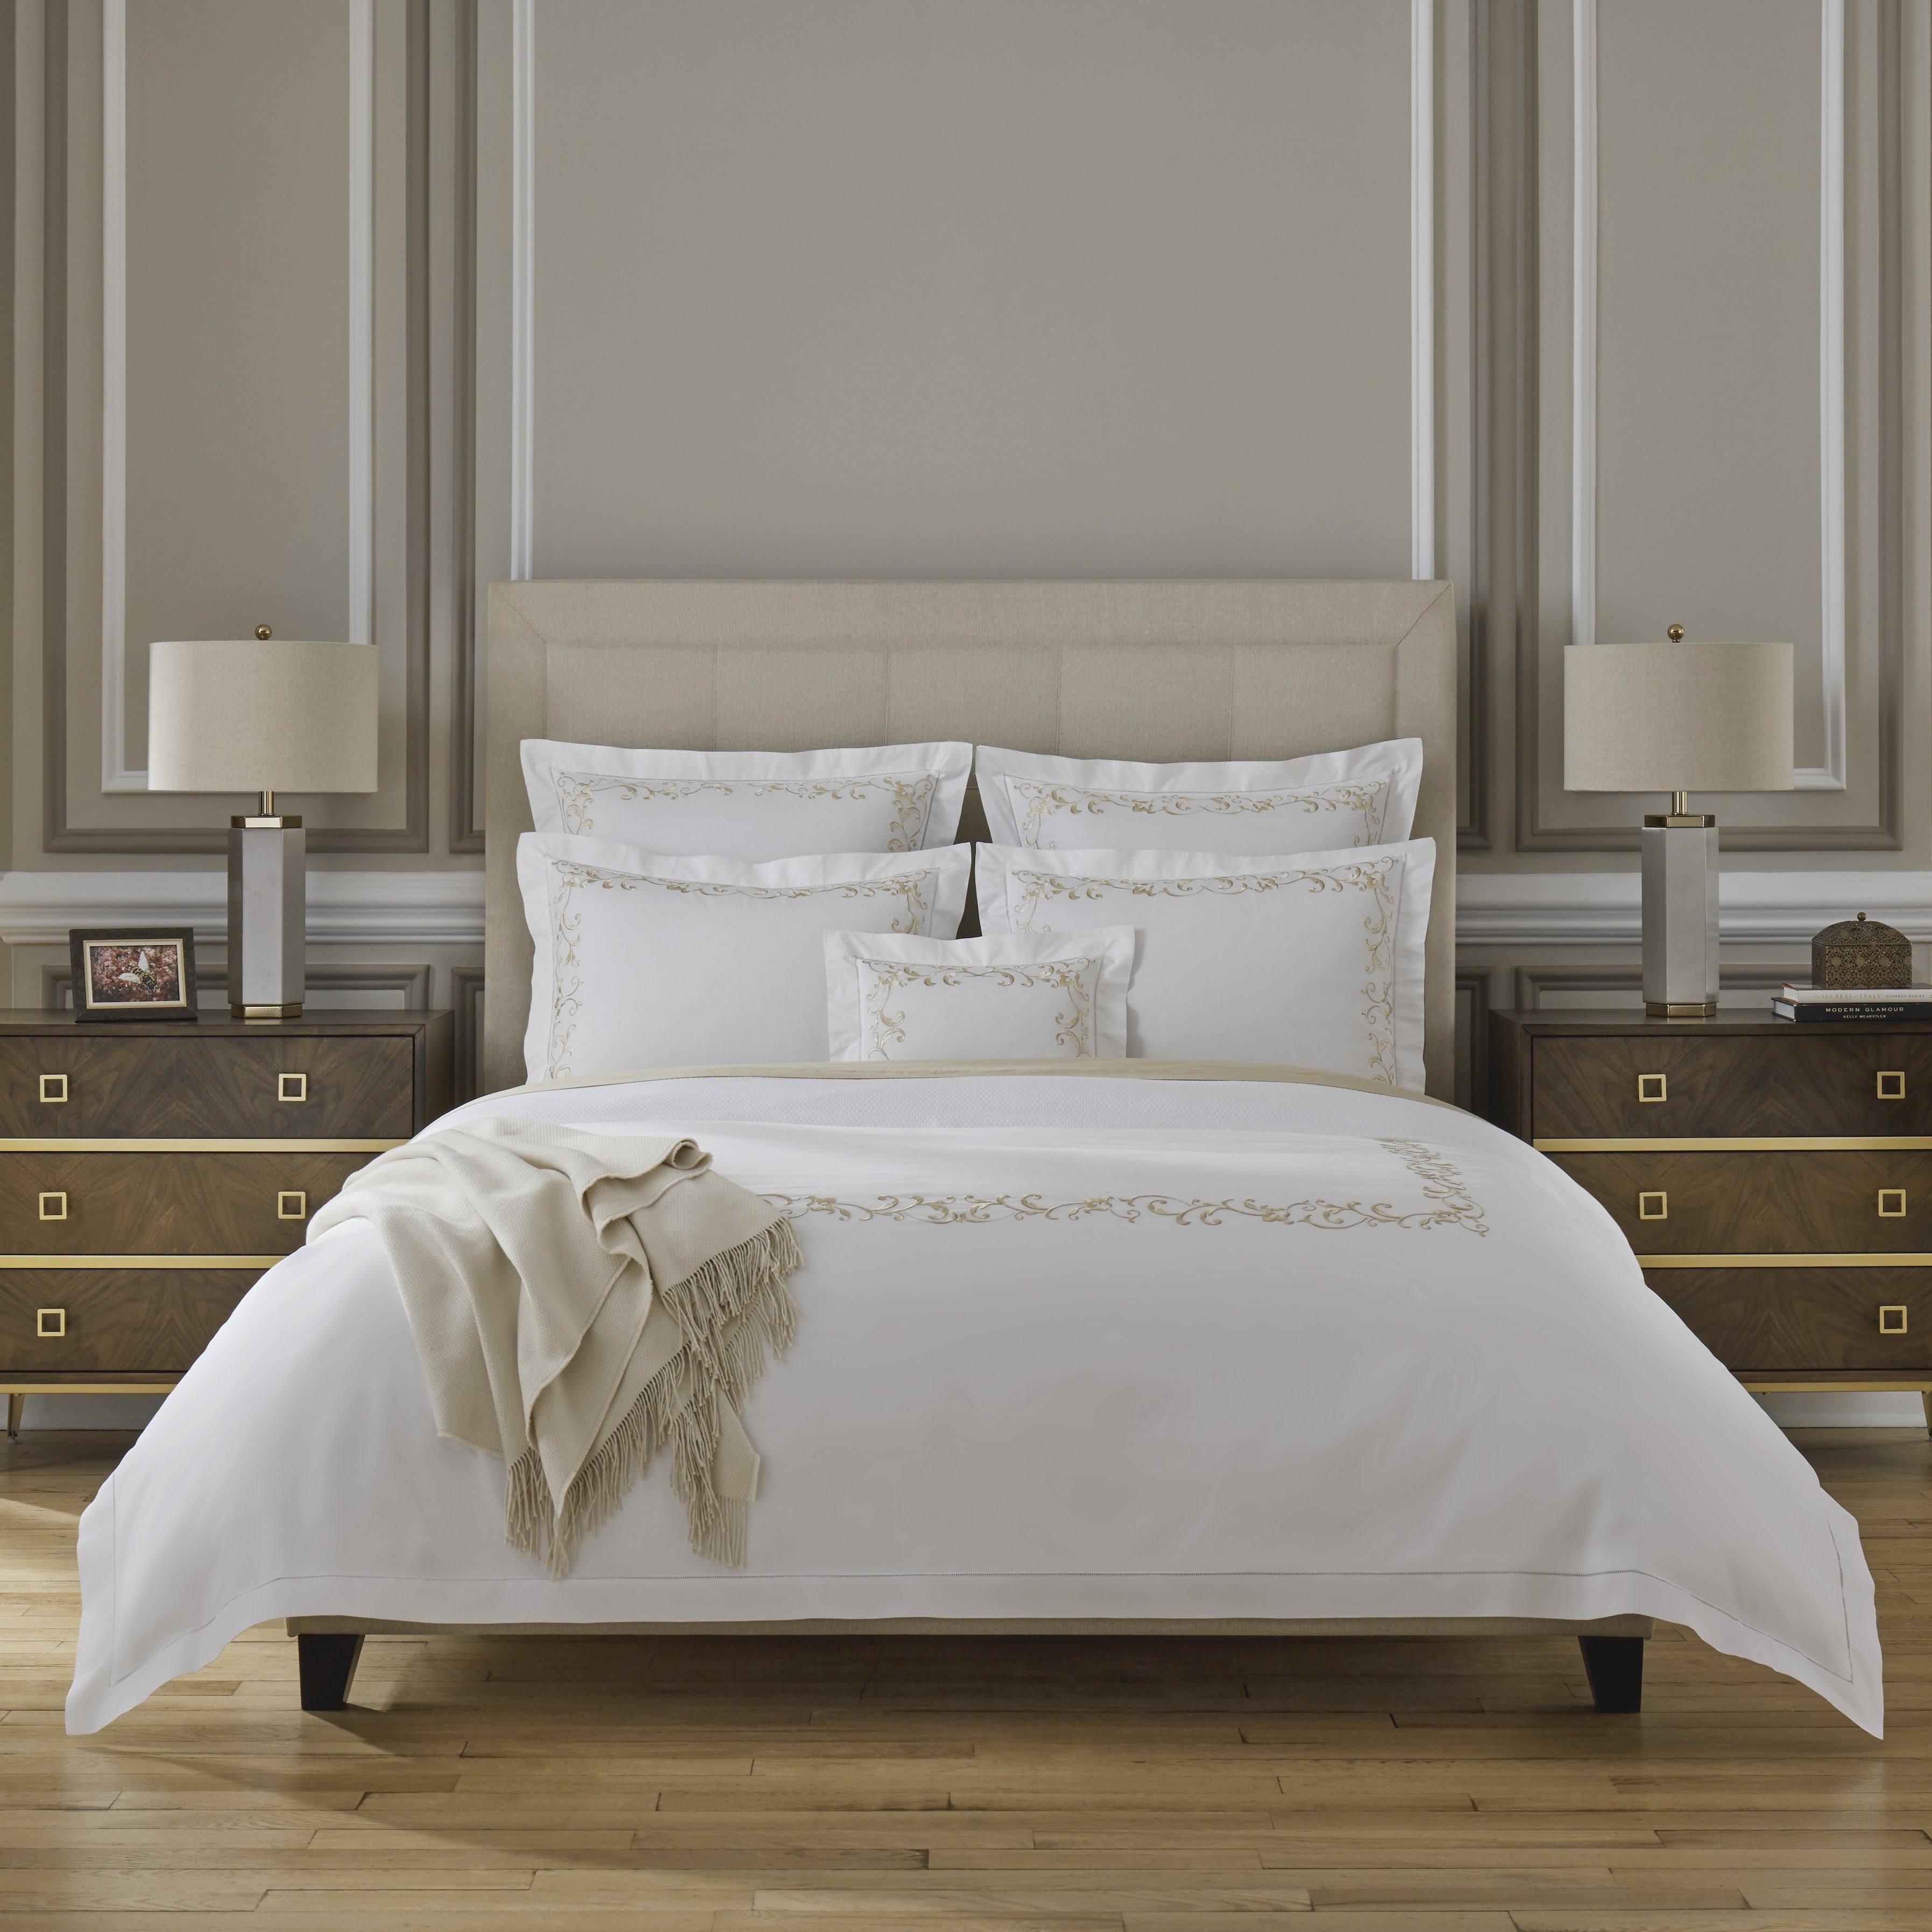 Griante Bed Linens